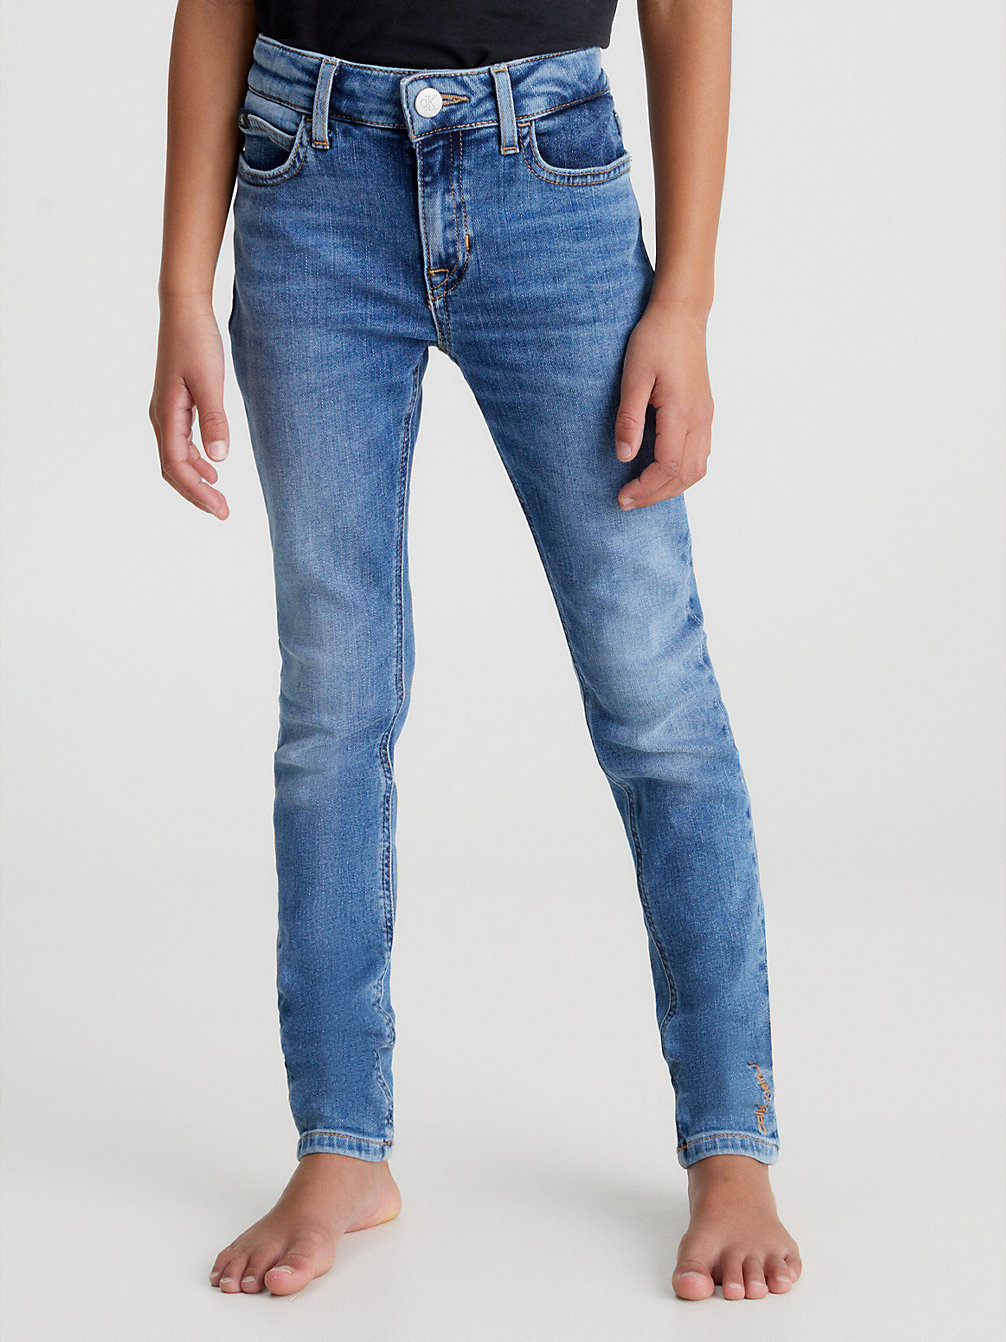 STORMY BLUE Jean Skinny Mid Rise undefined girls Calvin Klein